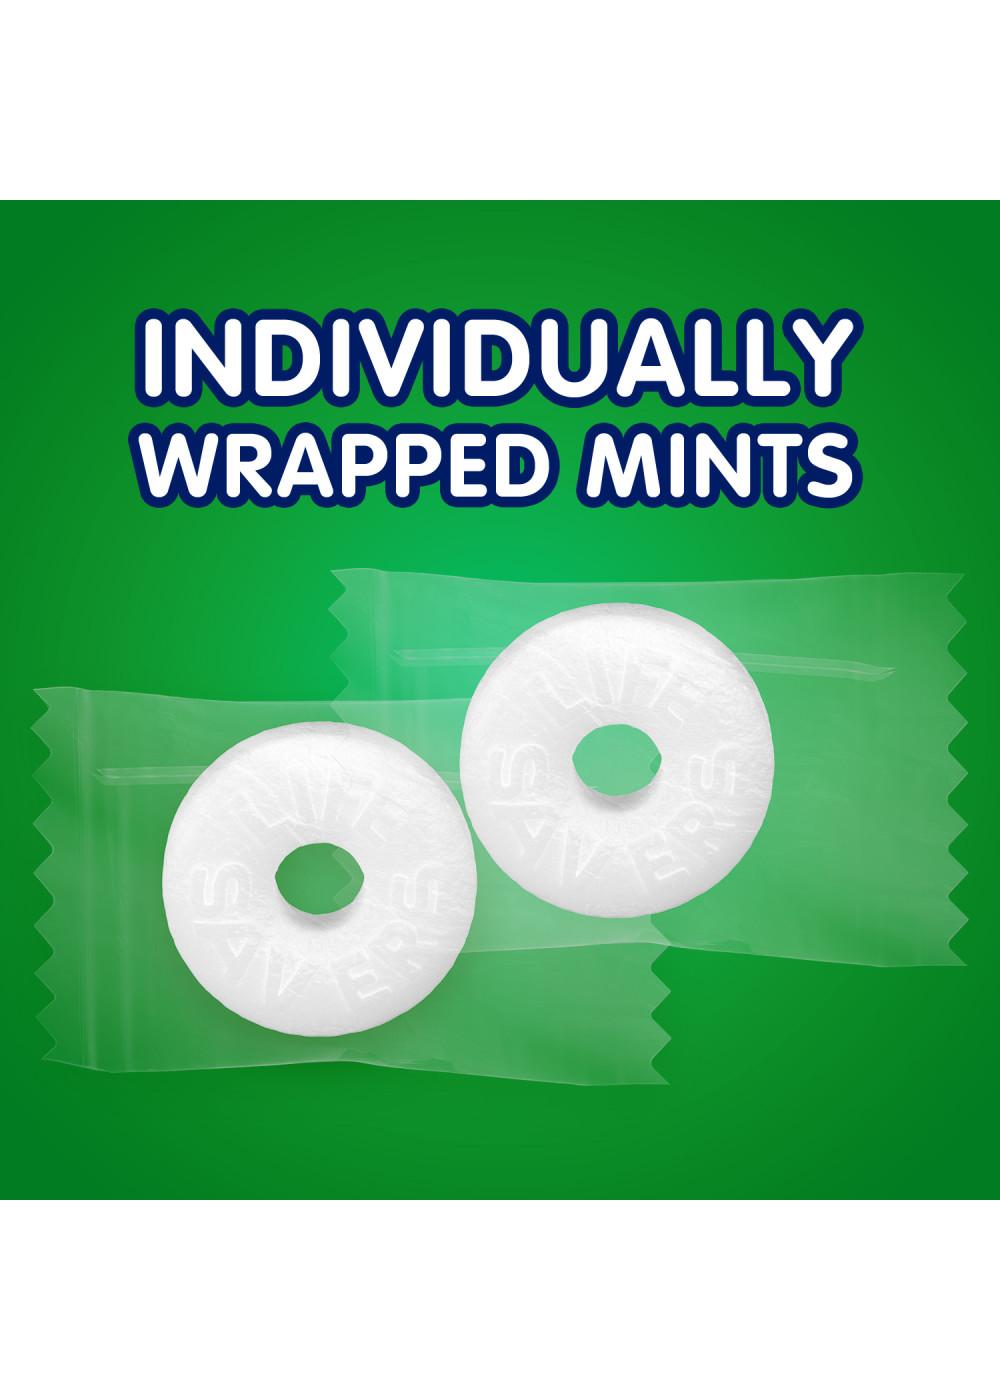 Life Savers Wint-O-Green Breath Mints; image 8 of 8